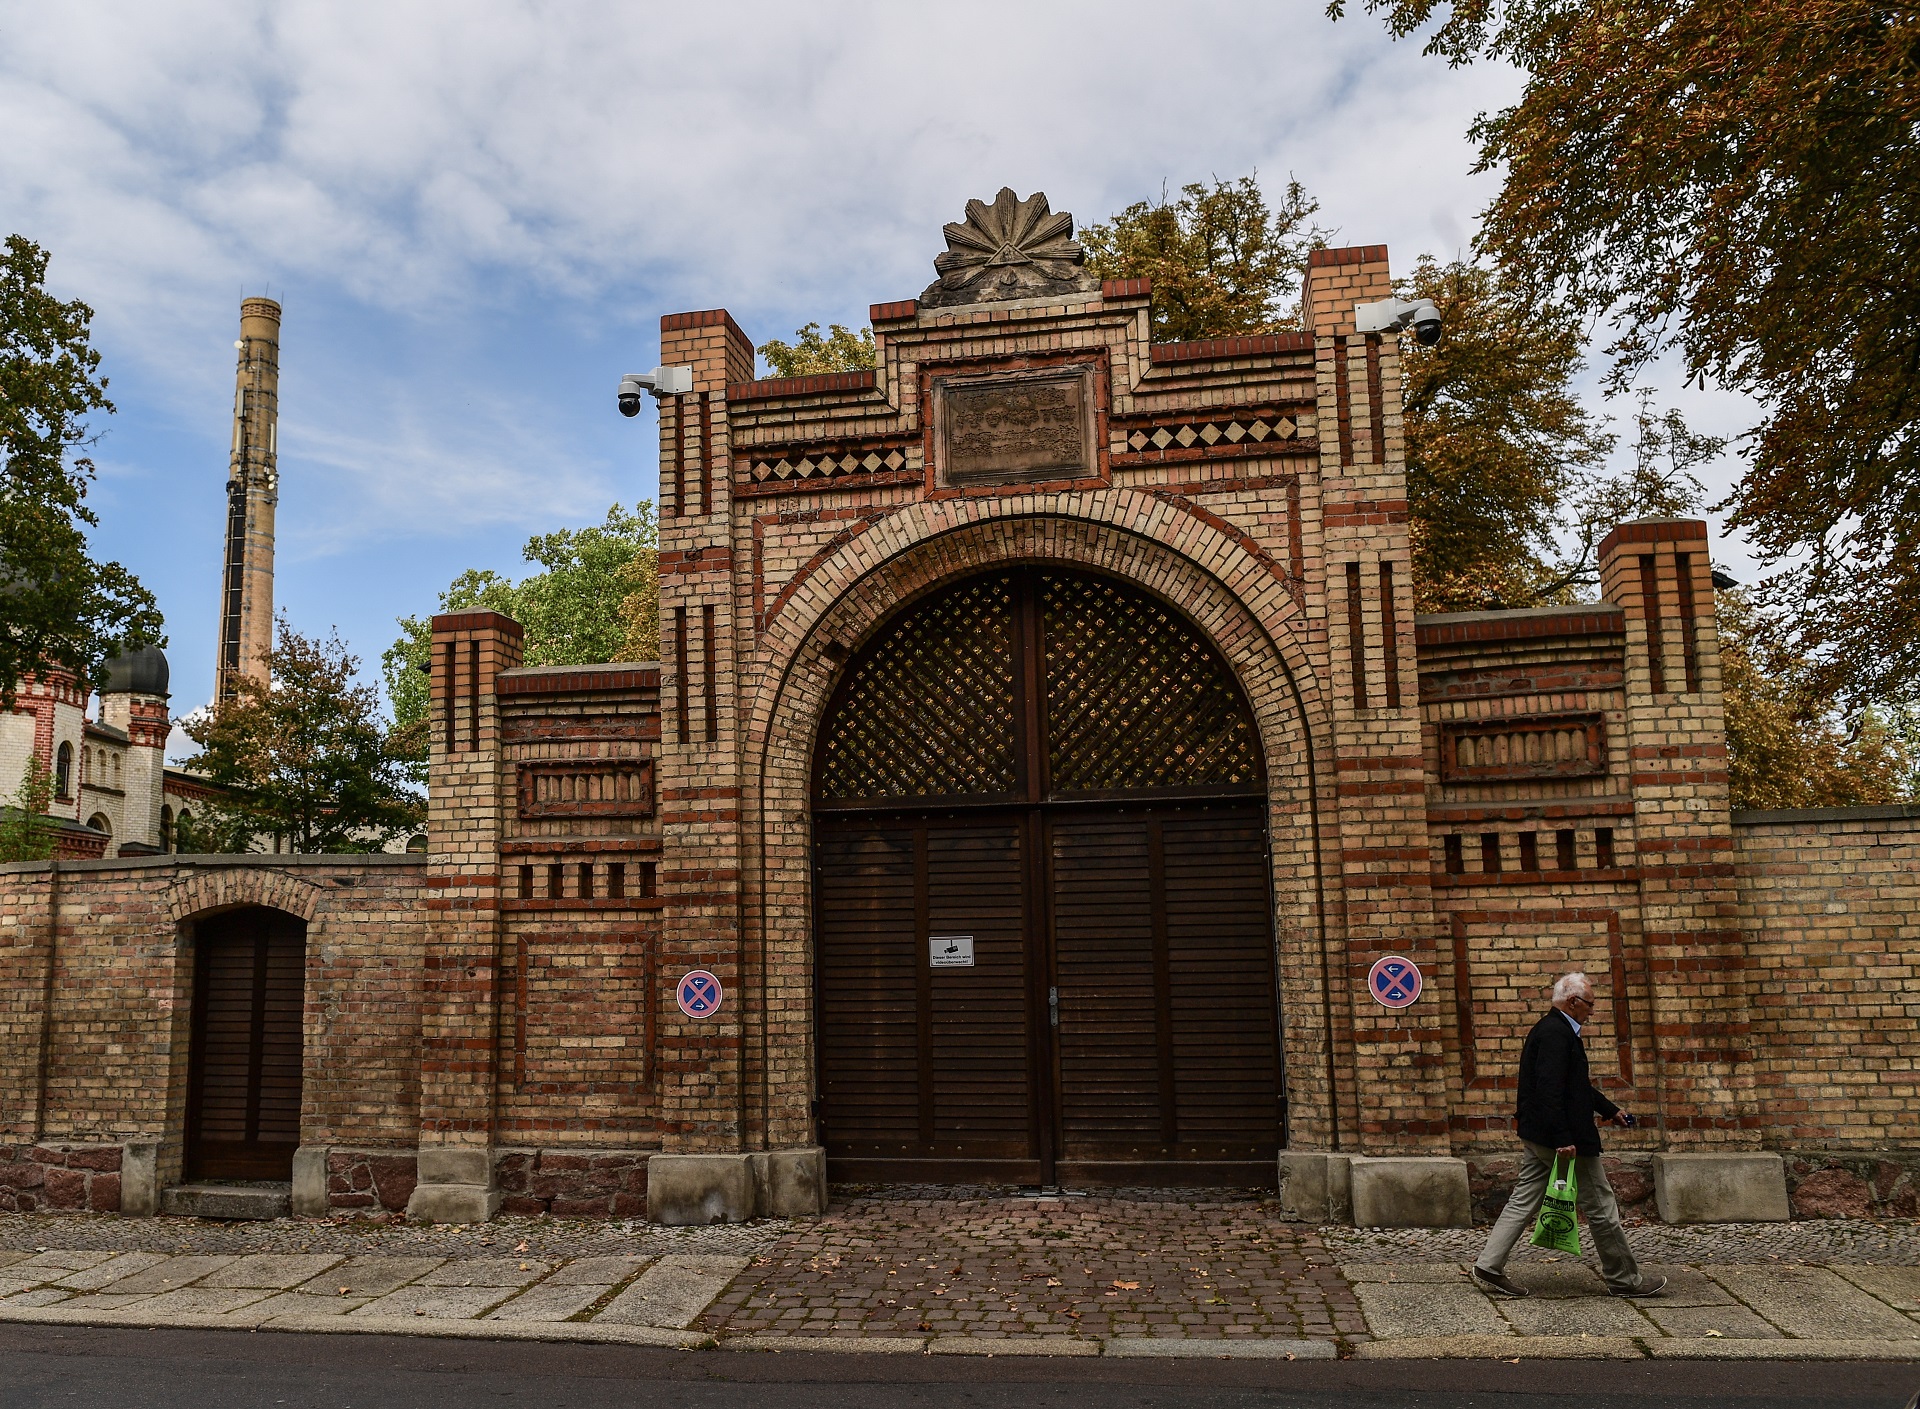 epa08693616 A view shows synagogue in Halle an der Saale, Germany, 24 September 2020. The 27-year-old German Neo-Nazi named by the media as Stephan Balliet, went on rampage shooting and killed two people on 09 October 2019 in front of the synagogue and a Kebab shop in Halle during the Jewish holiday of Yom Kippur.  EPA/FILIP SINGER